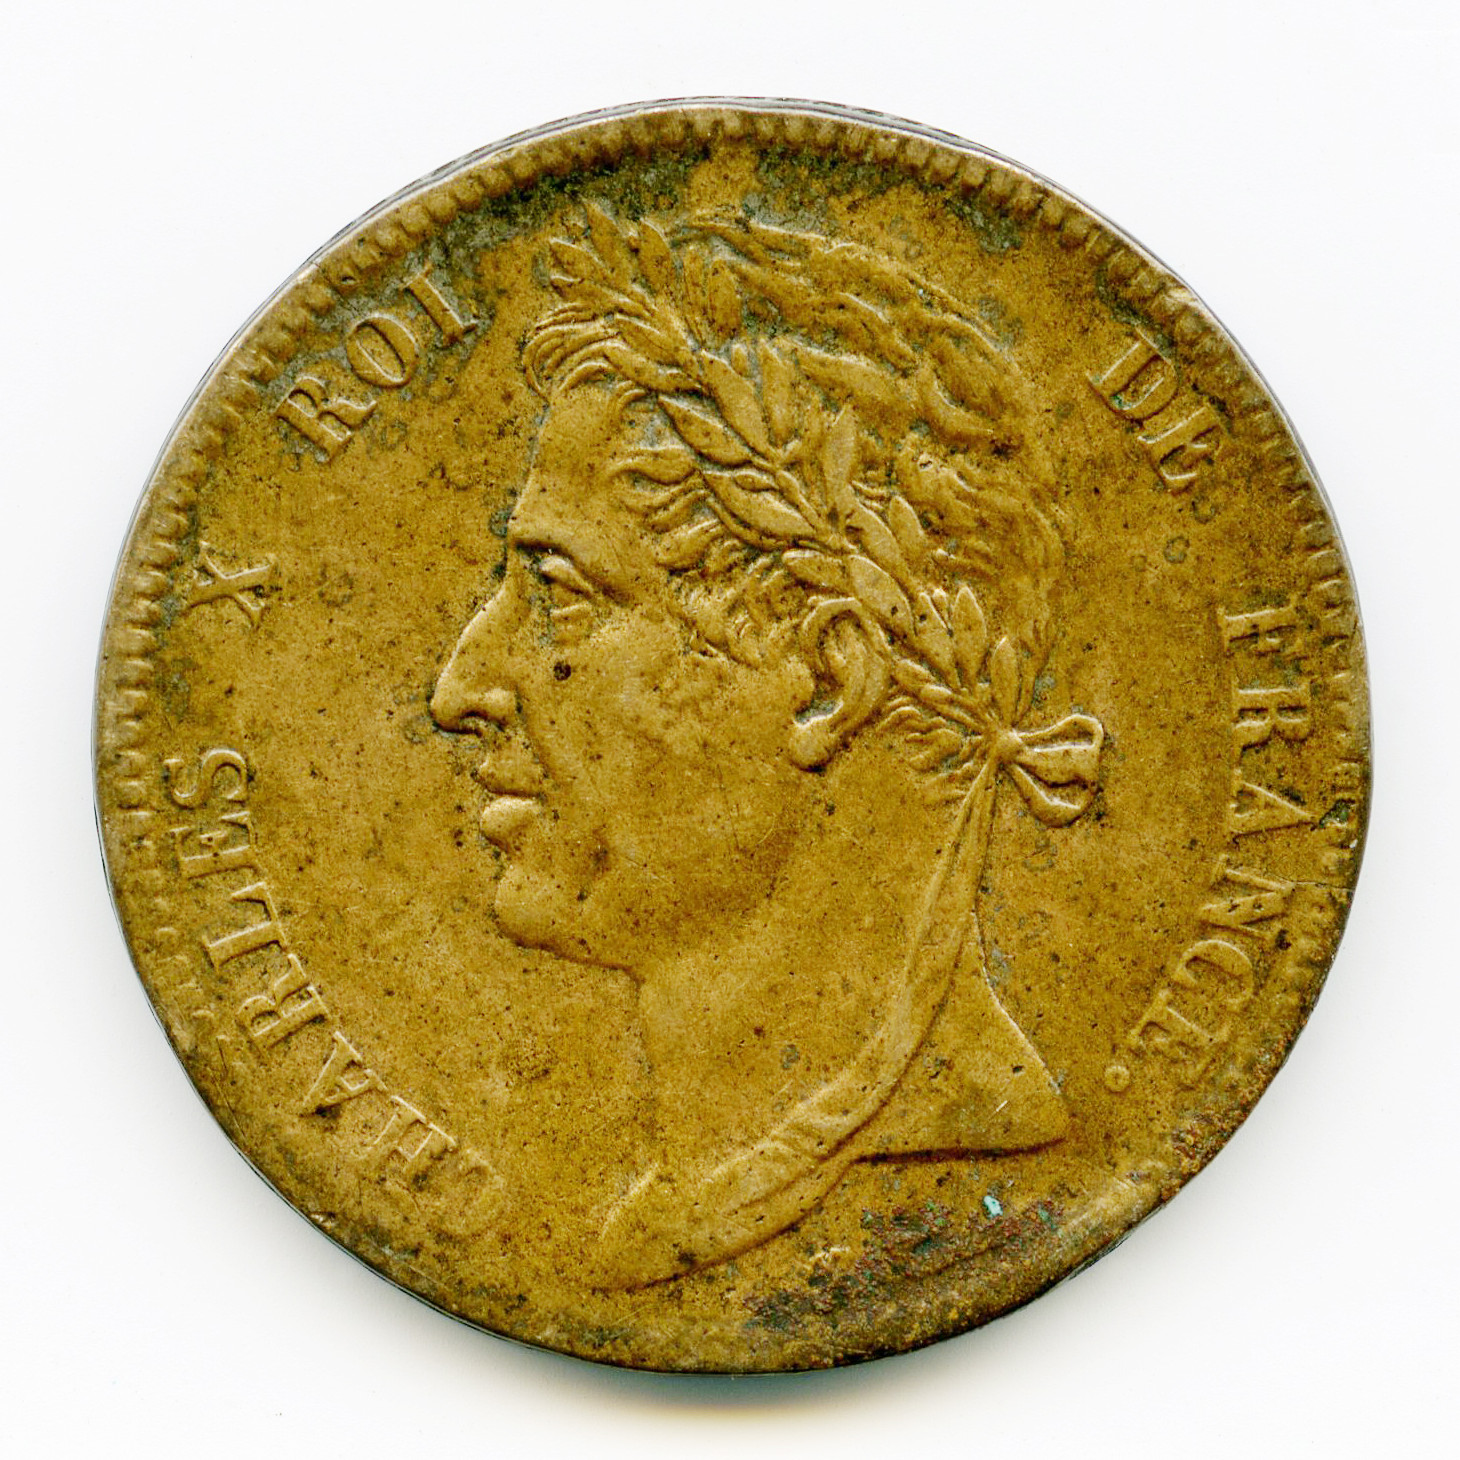 Charles X - 5 centimes - 1825 A avers